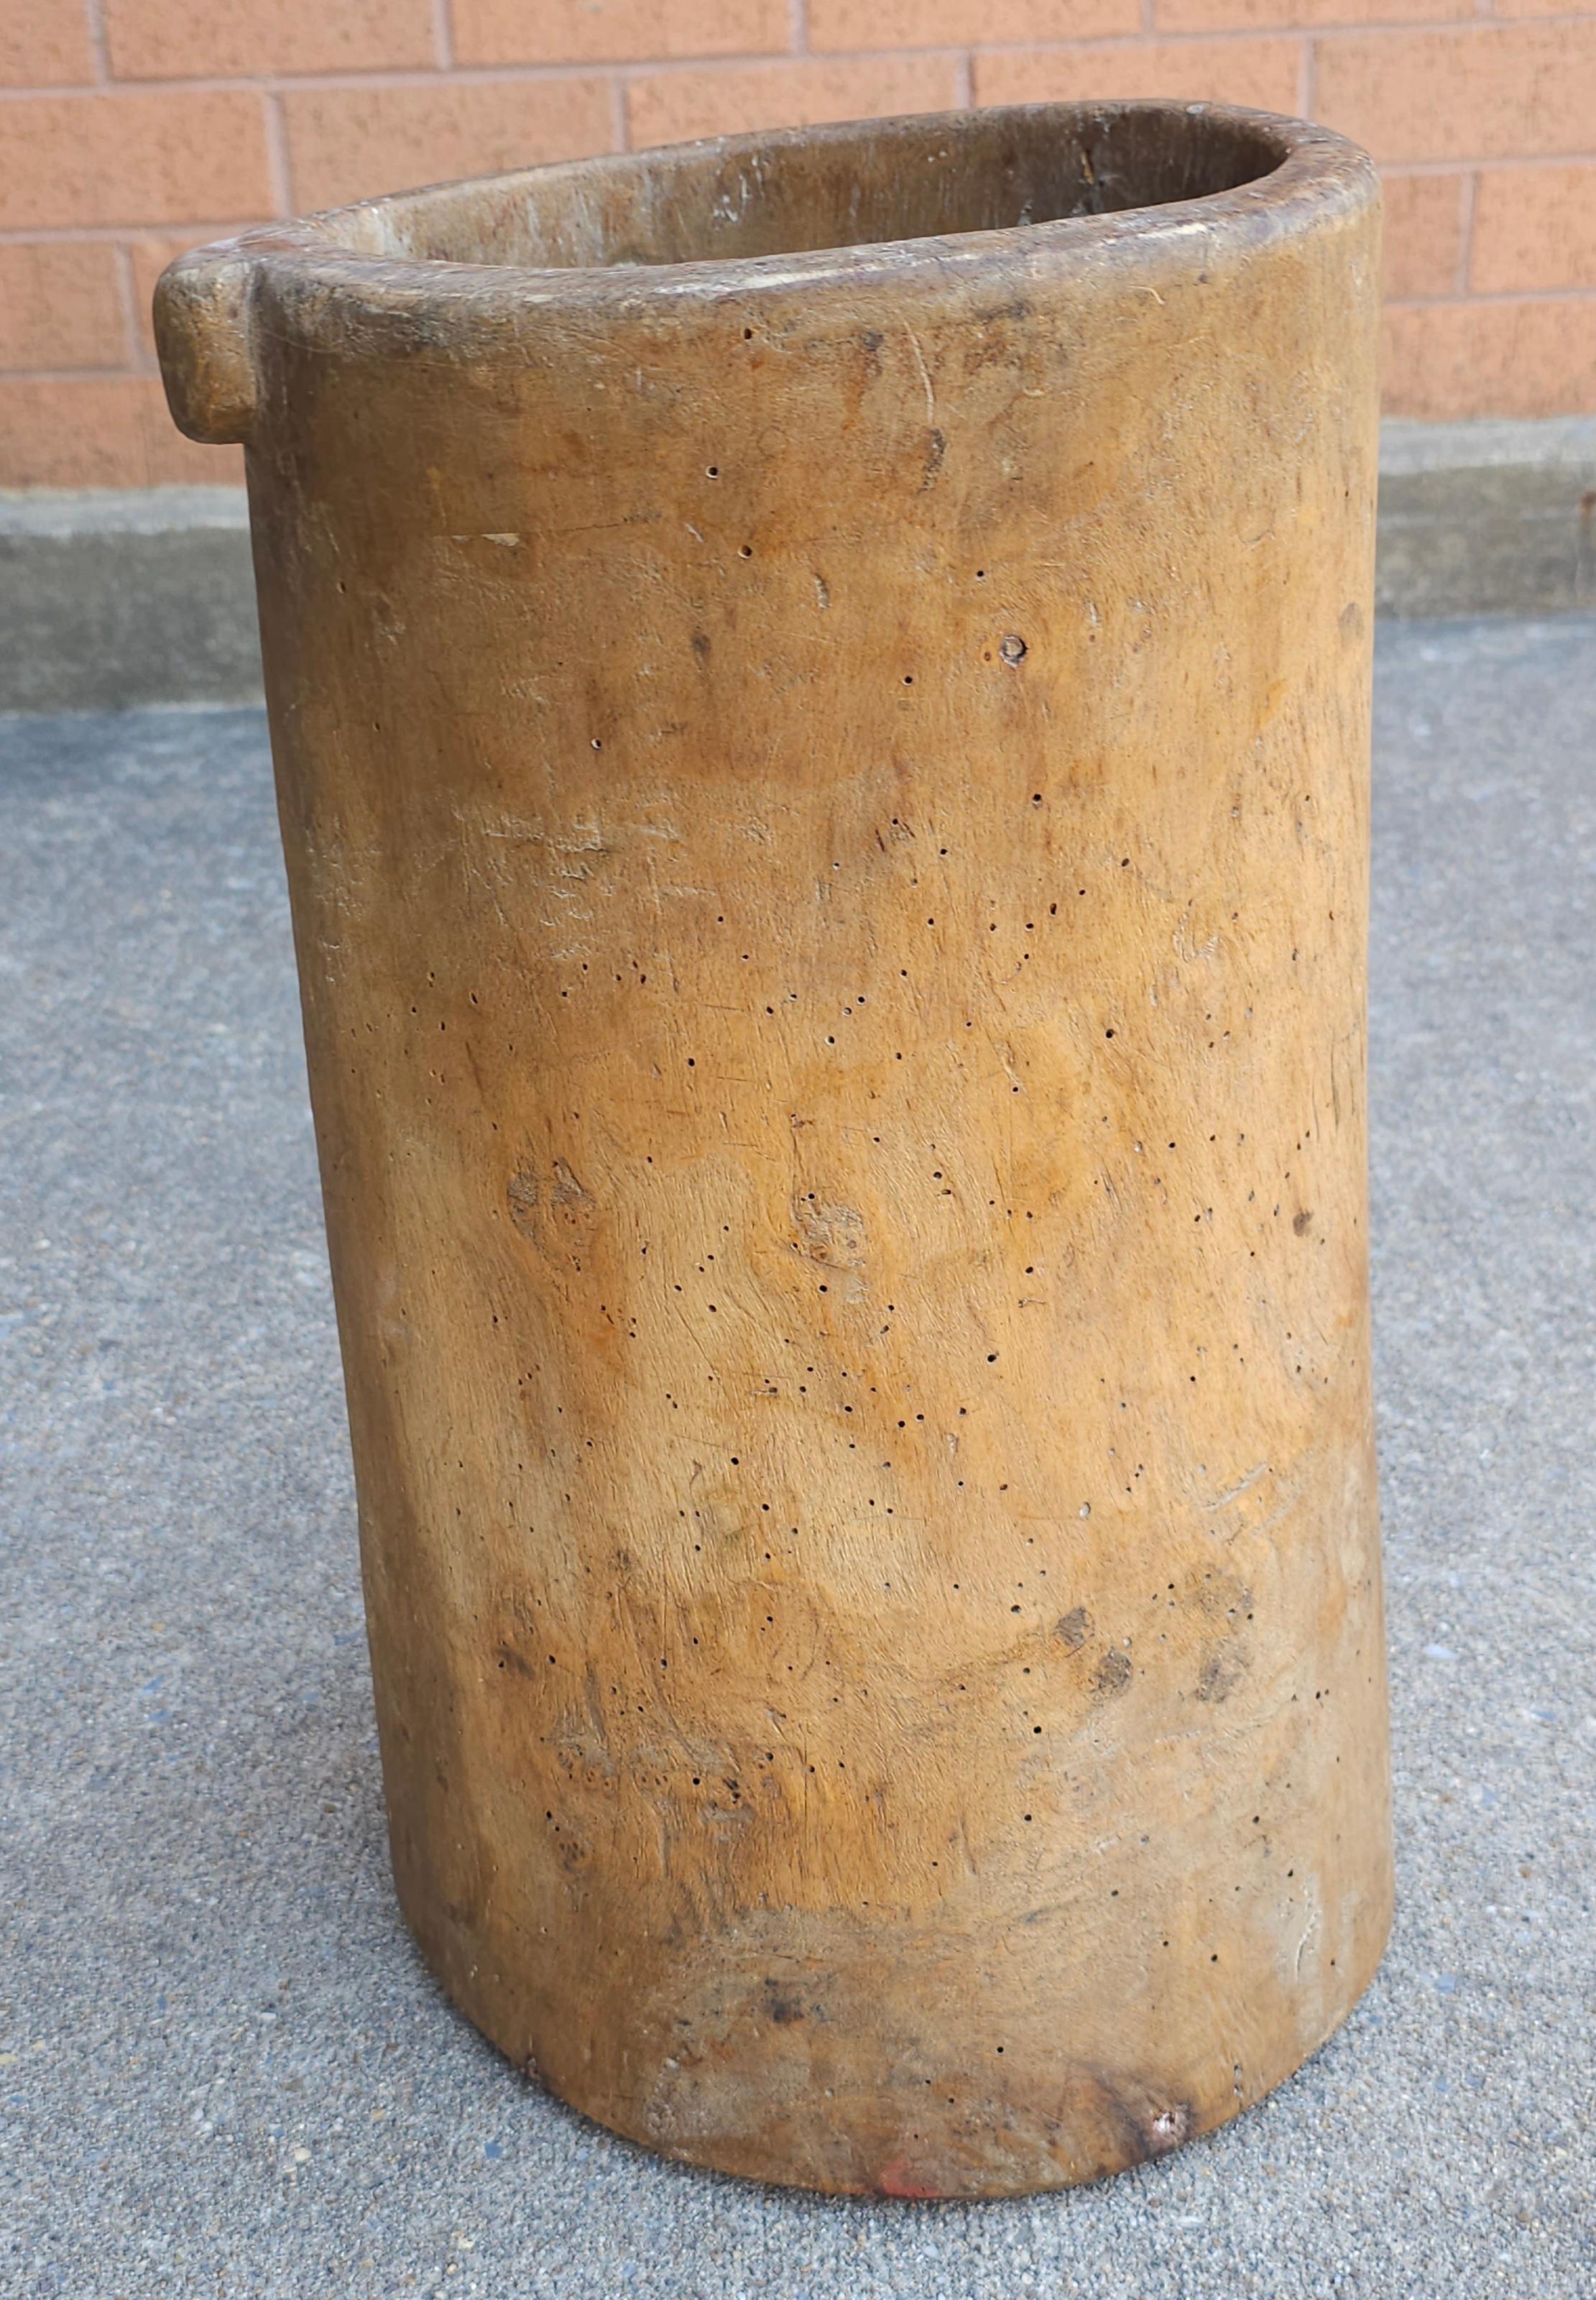 A Primitive American Handcrafted Wooden Umbrella Stand Measuring 9